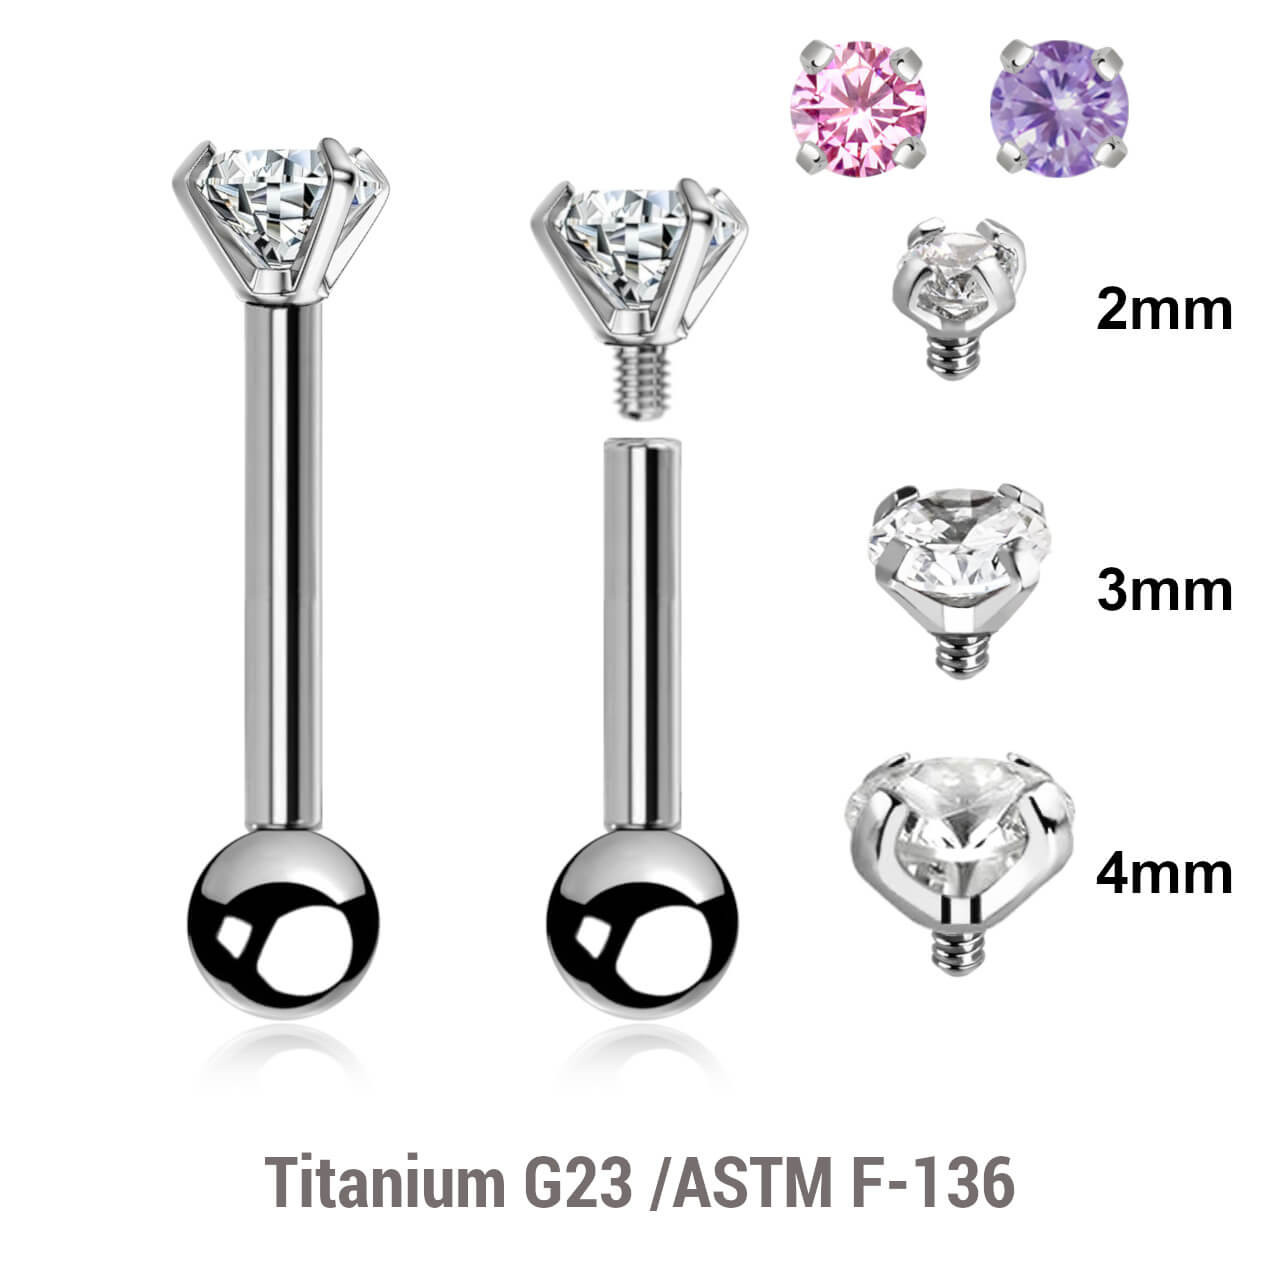 YBA12CZS Pack of 5 high polished titanium internally threaded helix barbells, Thickness 1.2mm, with a top prong set CZ stone and a lower 3mm plain ball